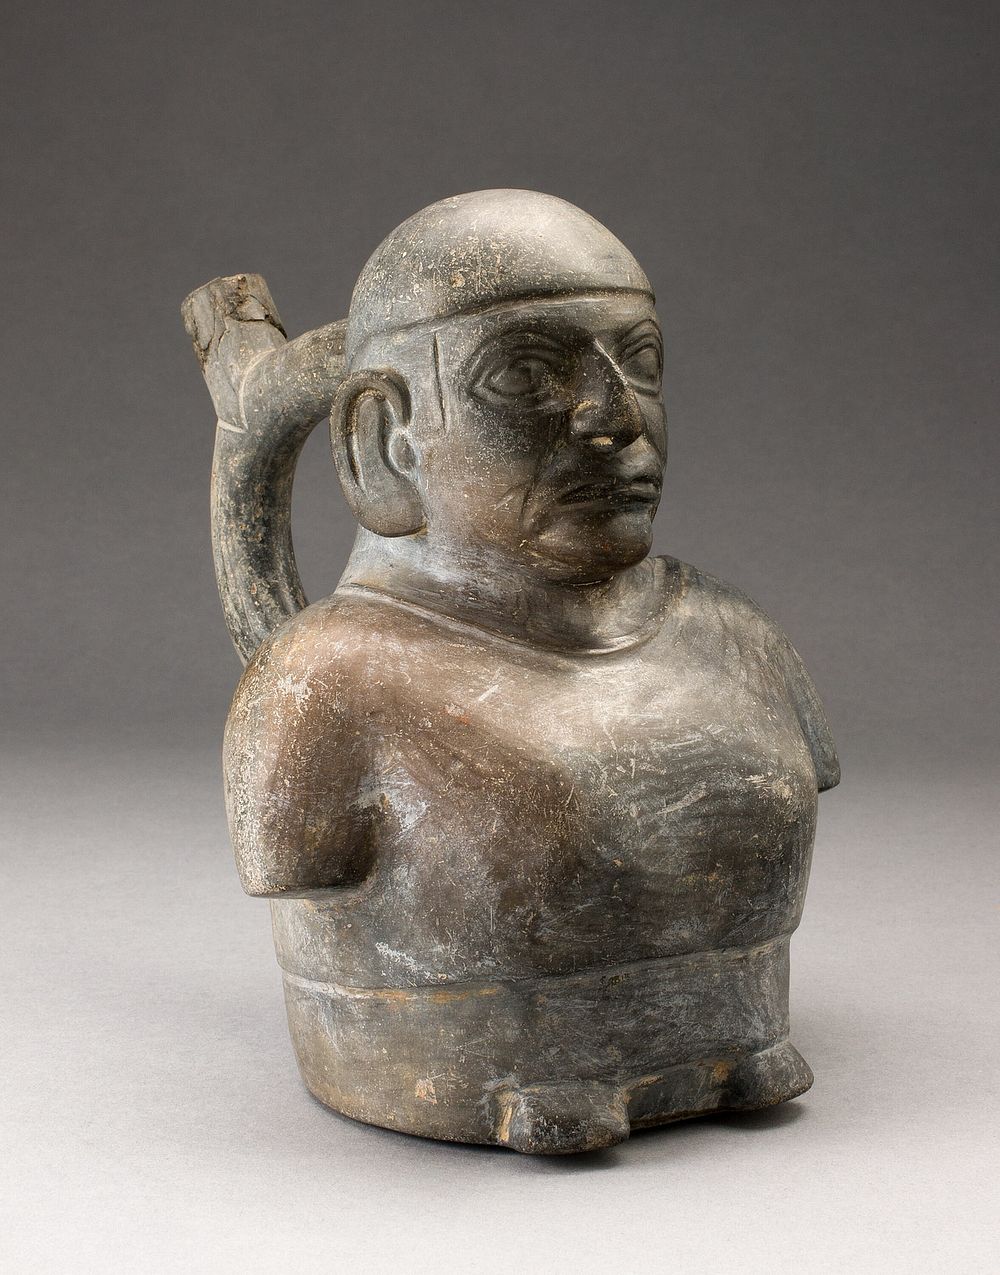 Portrait Vessel of Man with Arms that End at Elbows by Moche